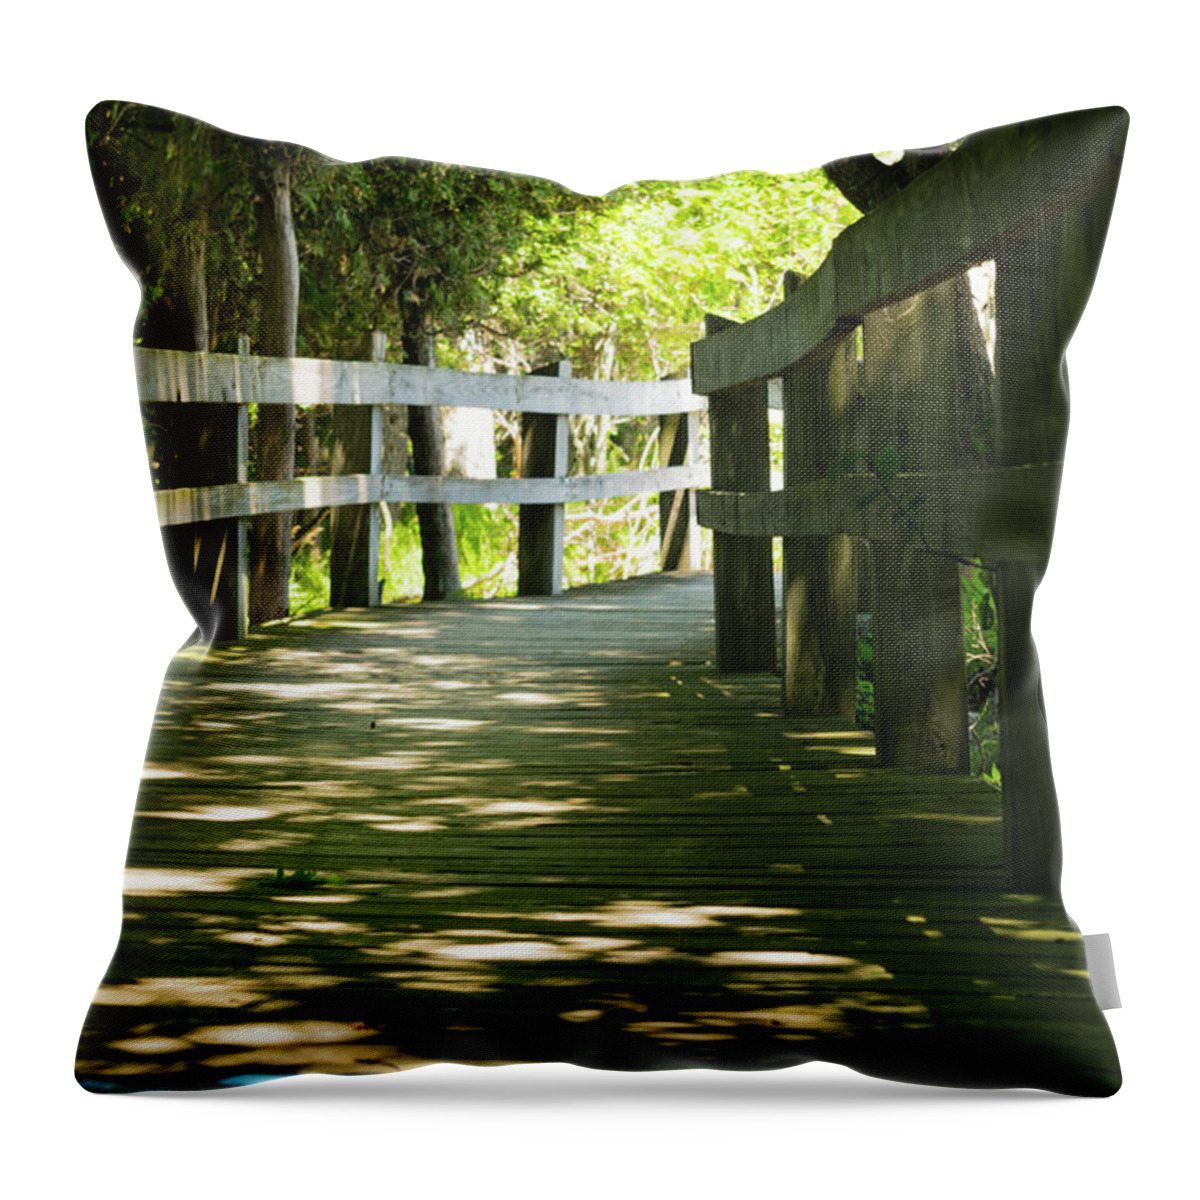 Landscape Throw Pillow featuring the photograph Boardwalk by Lester Plank